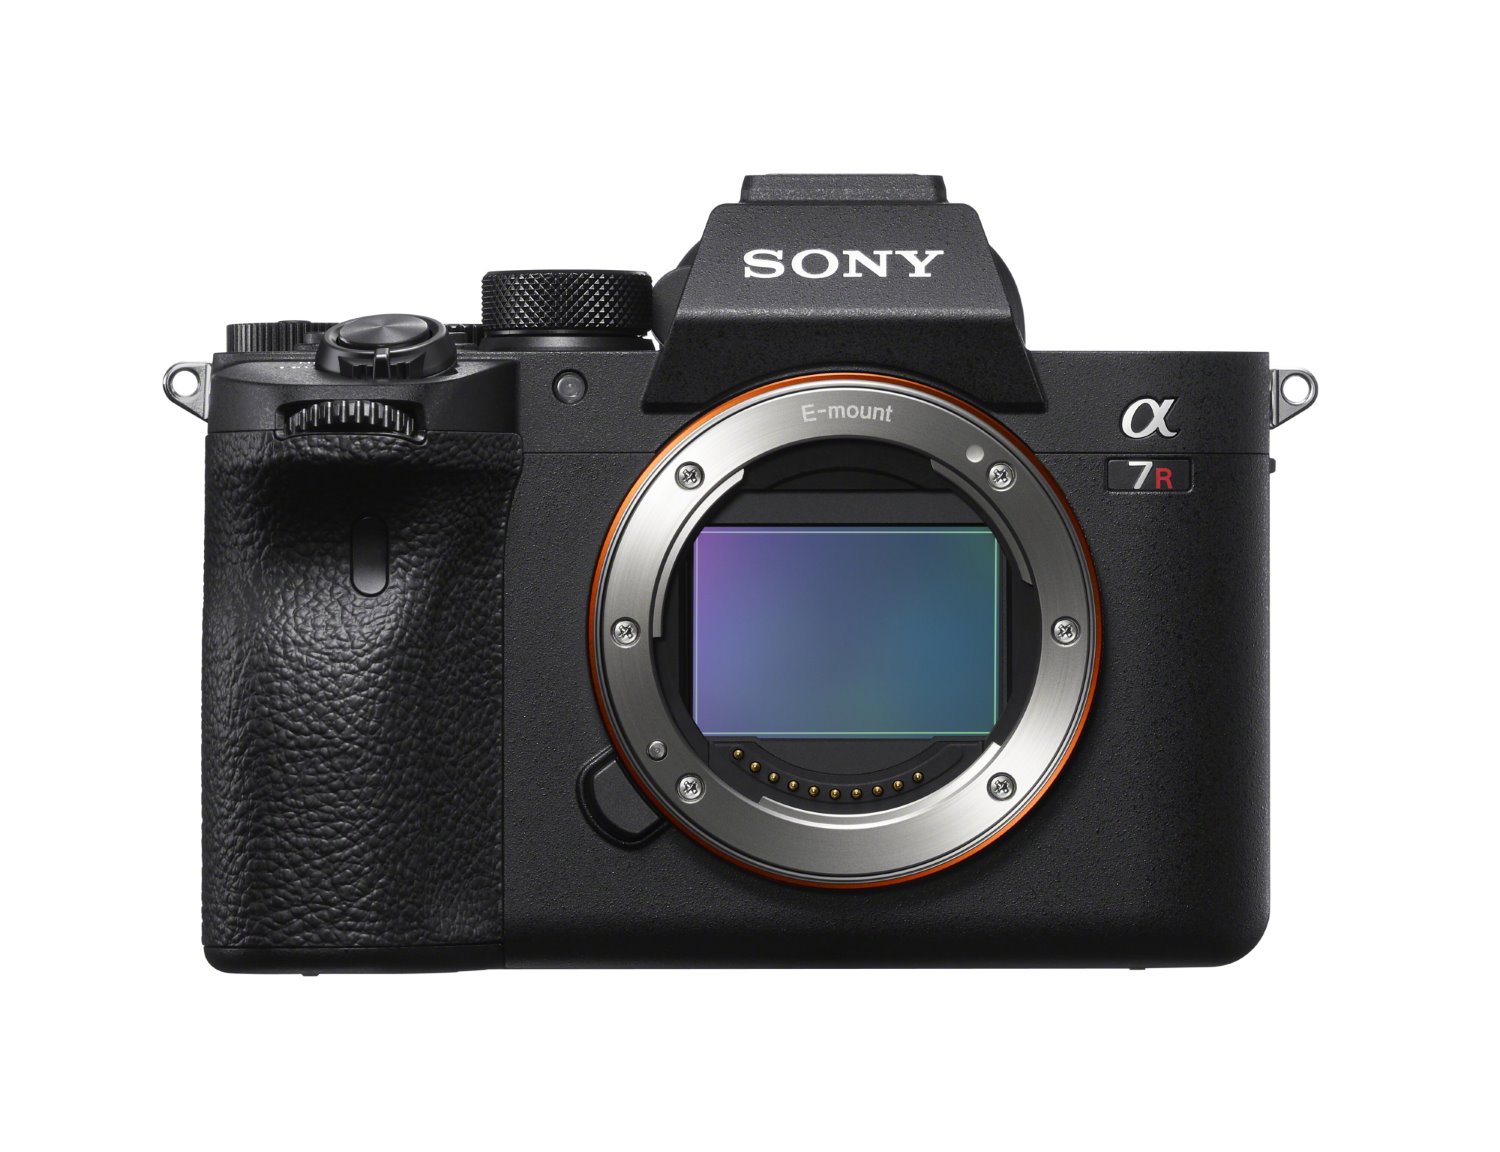 Sony a7R V Release Date: Long-Awaited Camera to Be Unveiled on October 26th